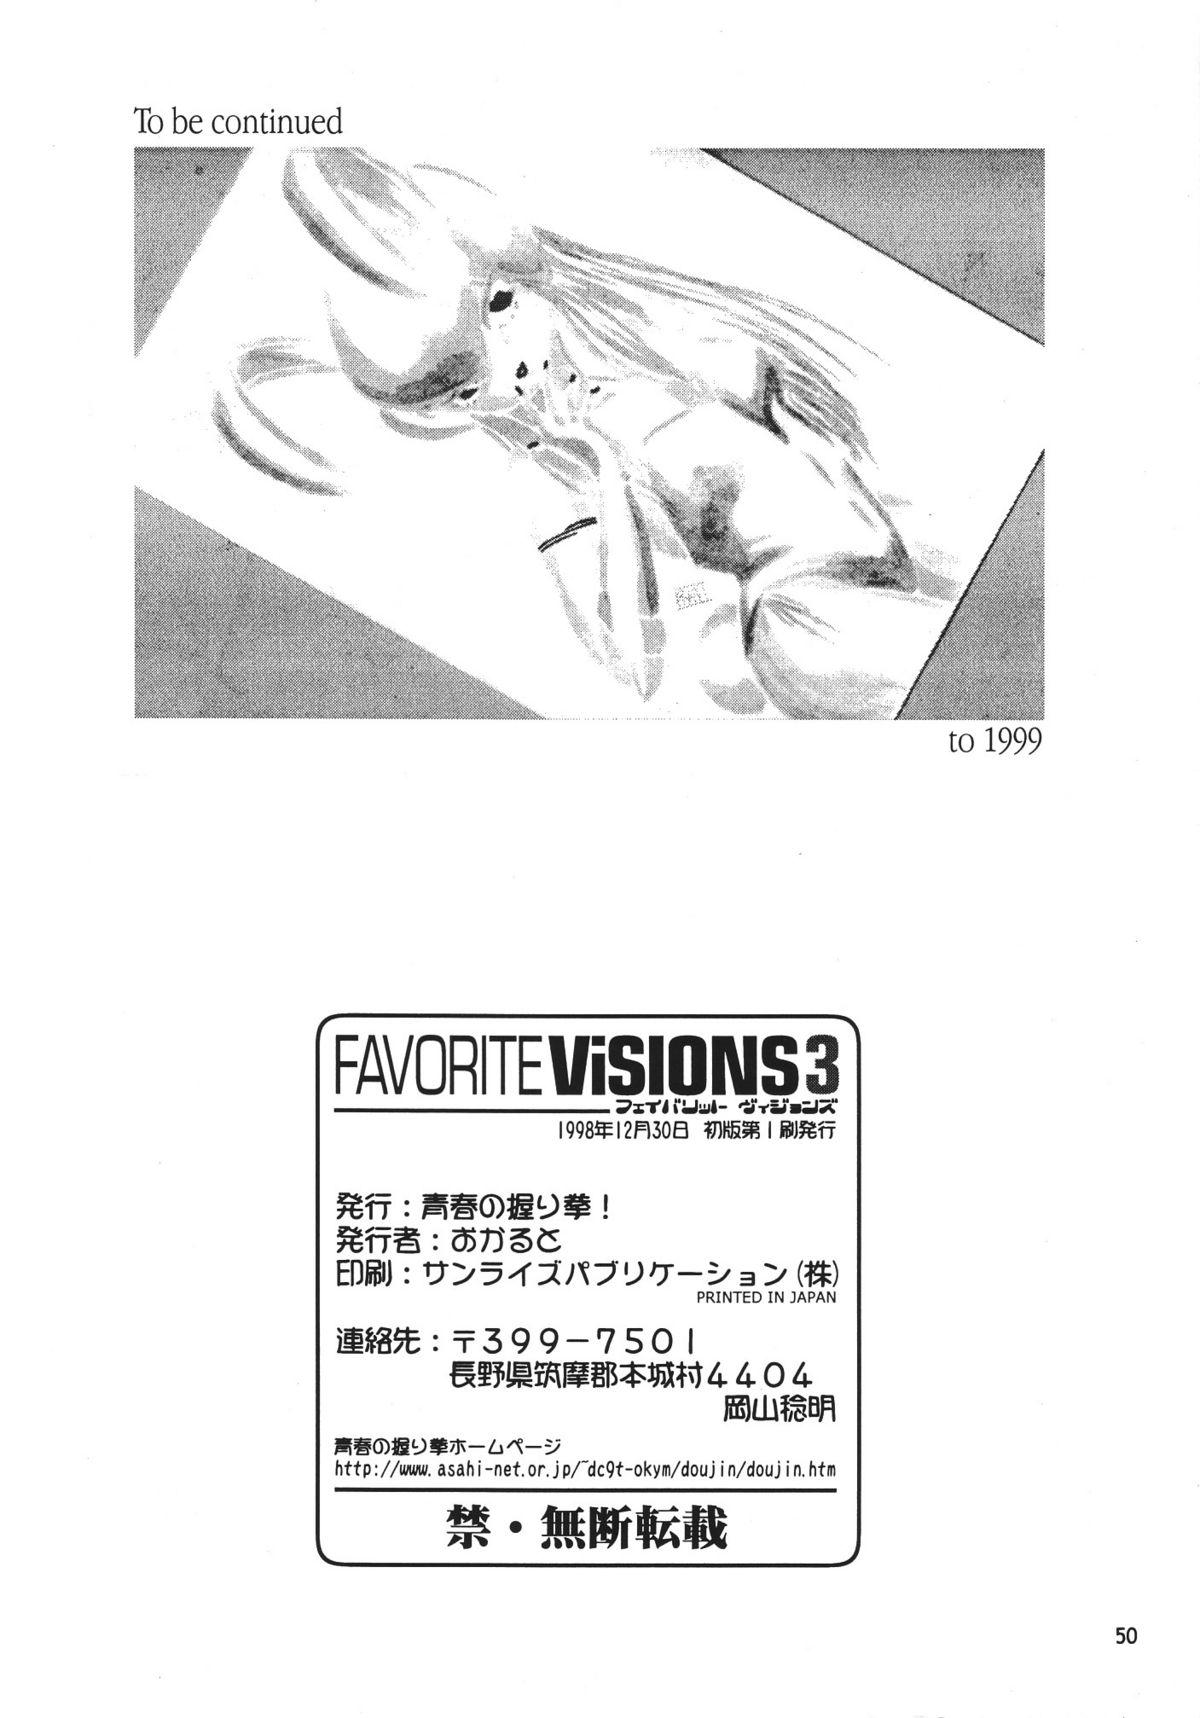 Blow Job Porn FAVORITE VISIONS 3 - Sailor moon Her - Page 52